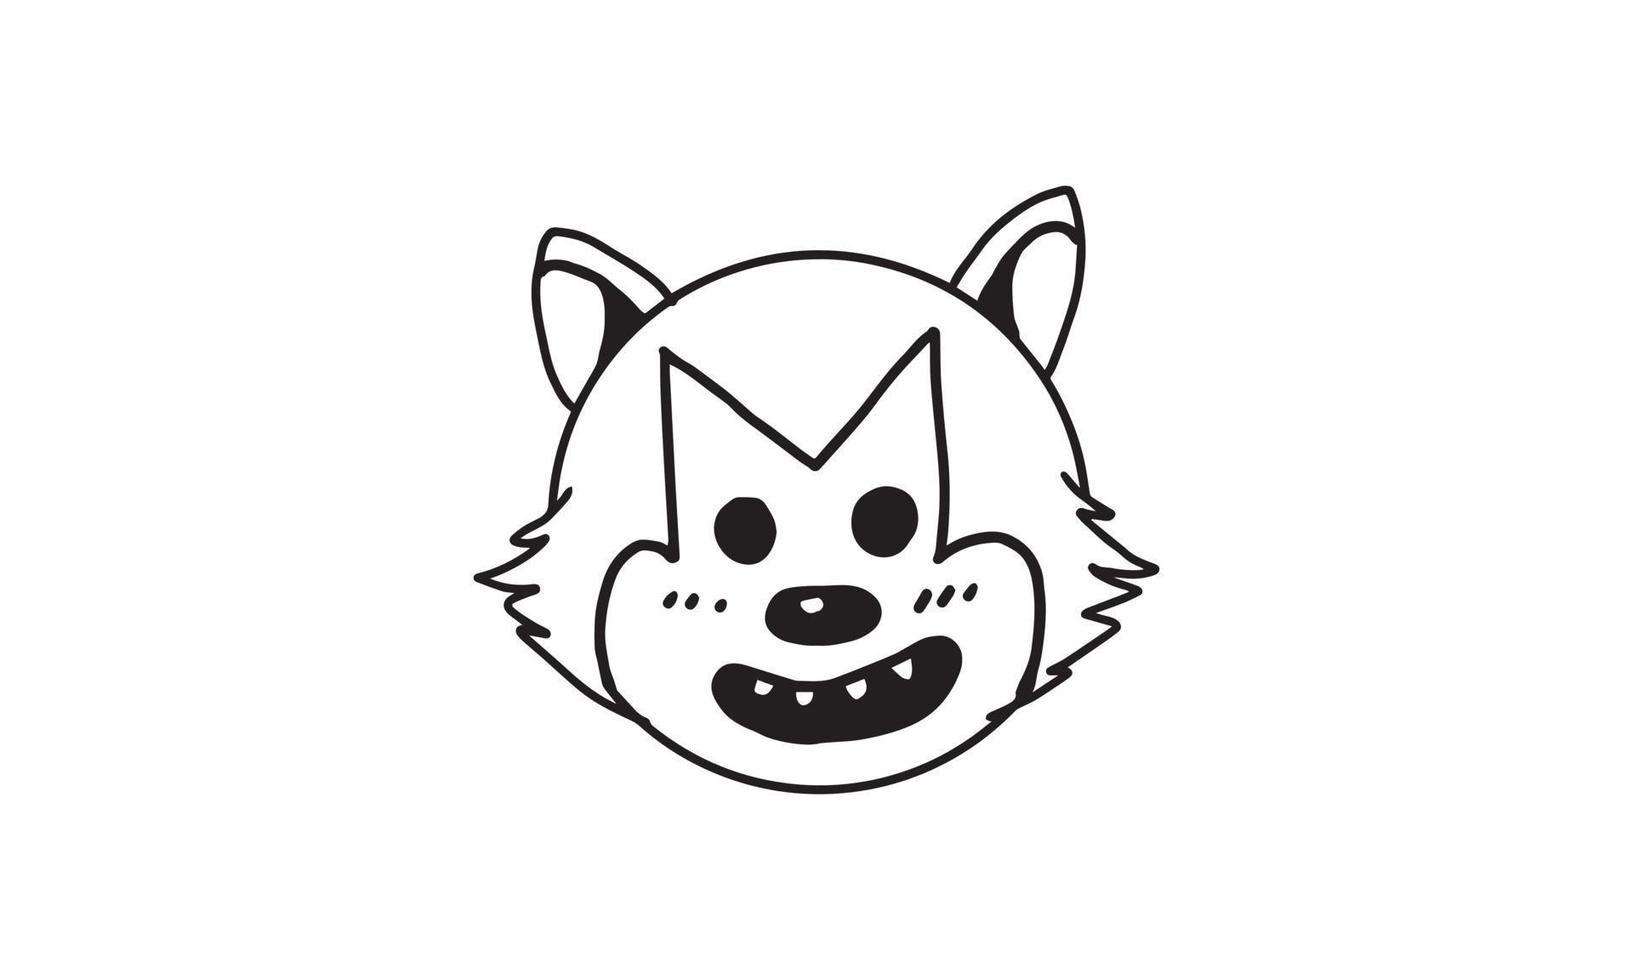 a cute face of funny wolf illustration. colorless cartoon for drawing and coloring activities. fun activity for kids development and creativity. object isolated on white background in vector design.